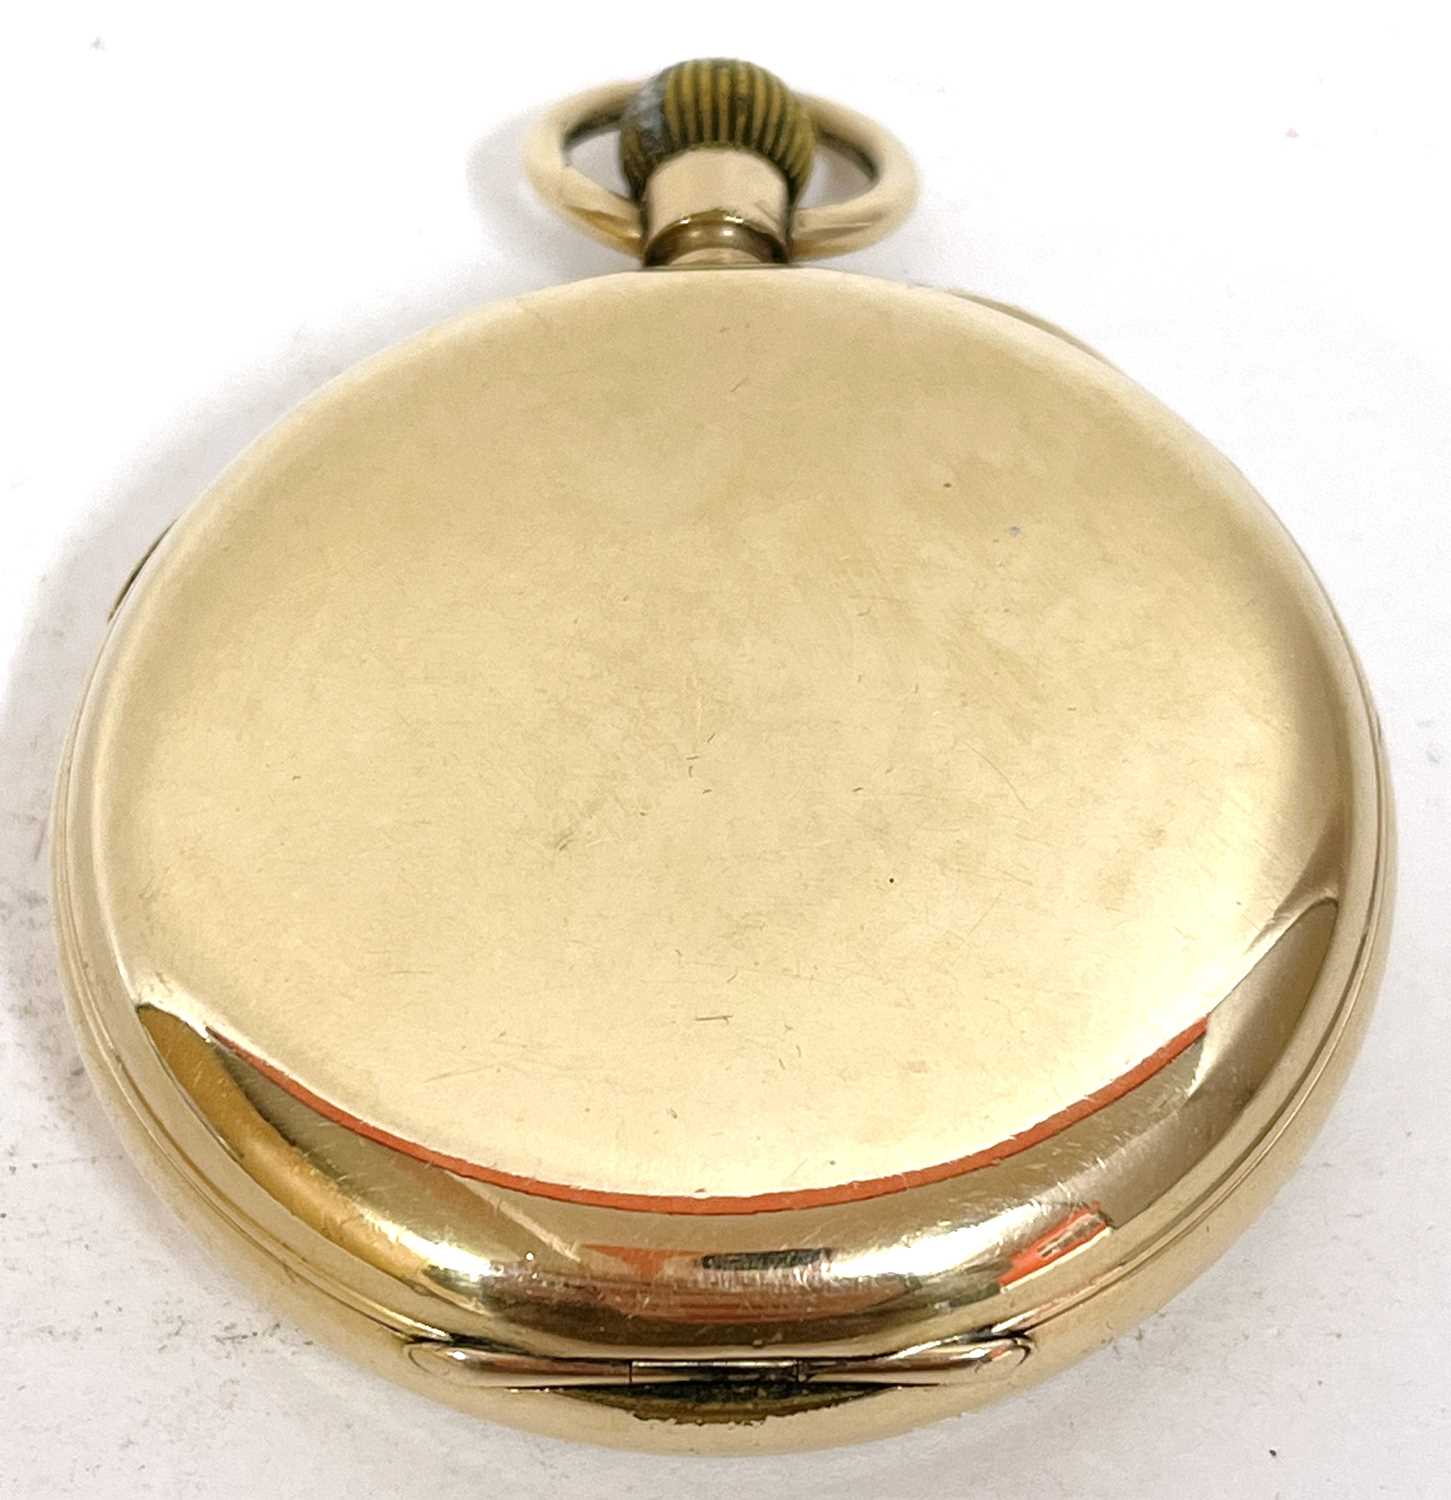 A rolled gold Lancashire Watch Company pocket watch, the watch has a manually crown wound movement - Image 2 of 7